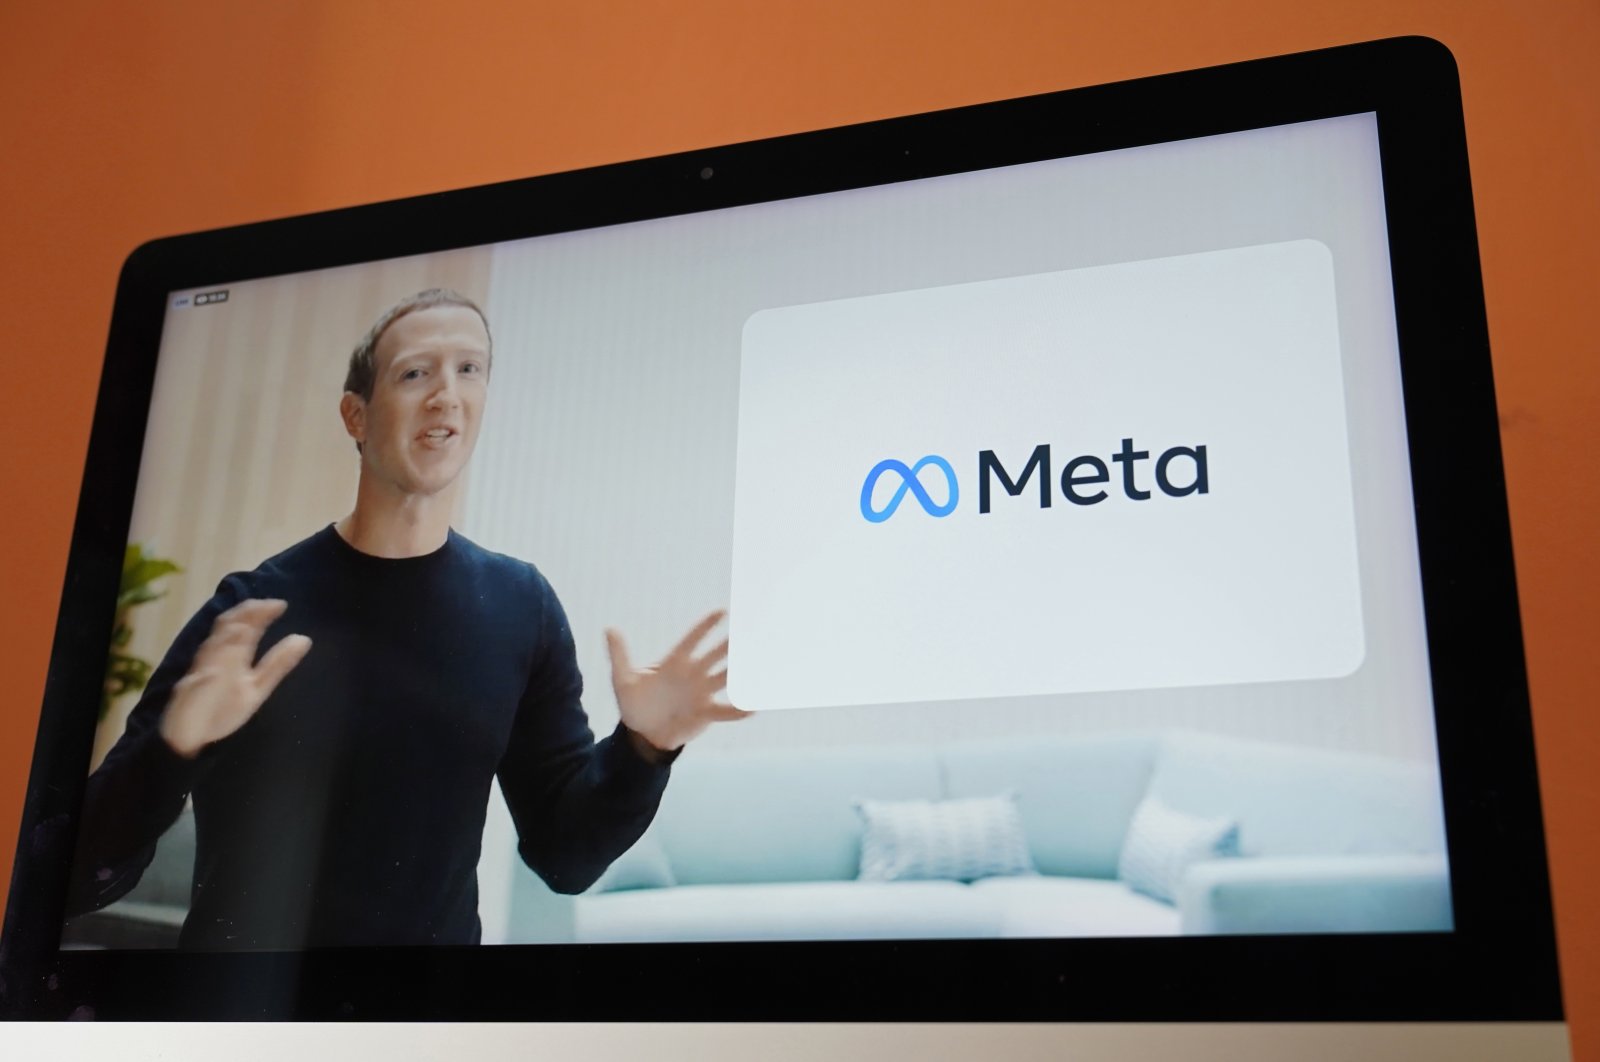 Seen on the screen of a device in Sausalito, Calif., Facebook CEO Mark Zuckerberg announces the company&#039;s new name, Meta, during a virtual event, U.S., Oct. 28, 2021. (AP Photo)